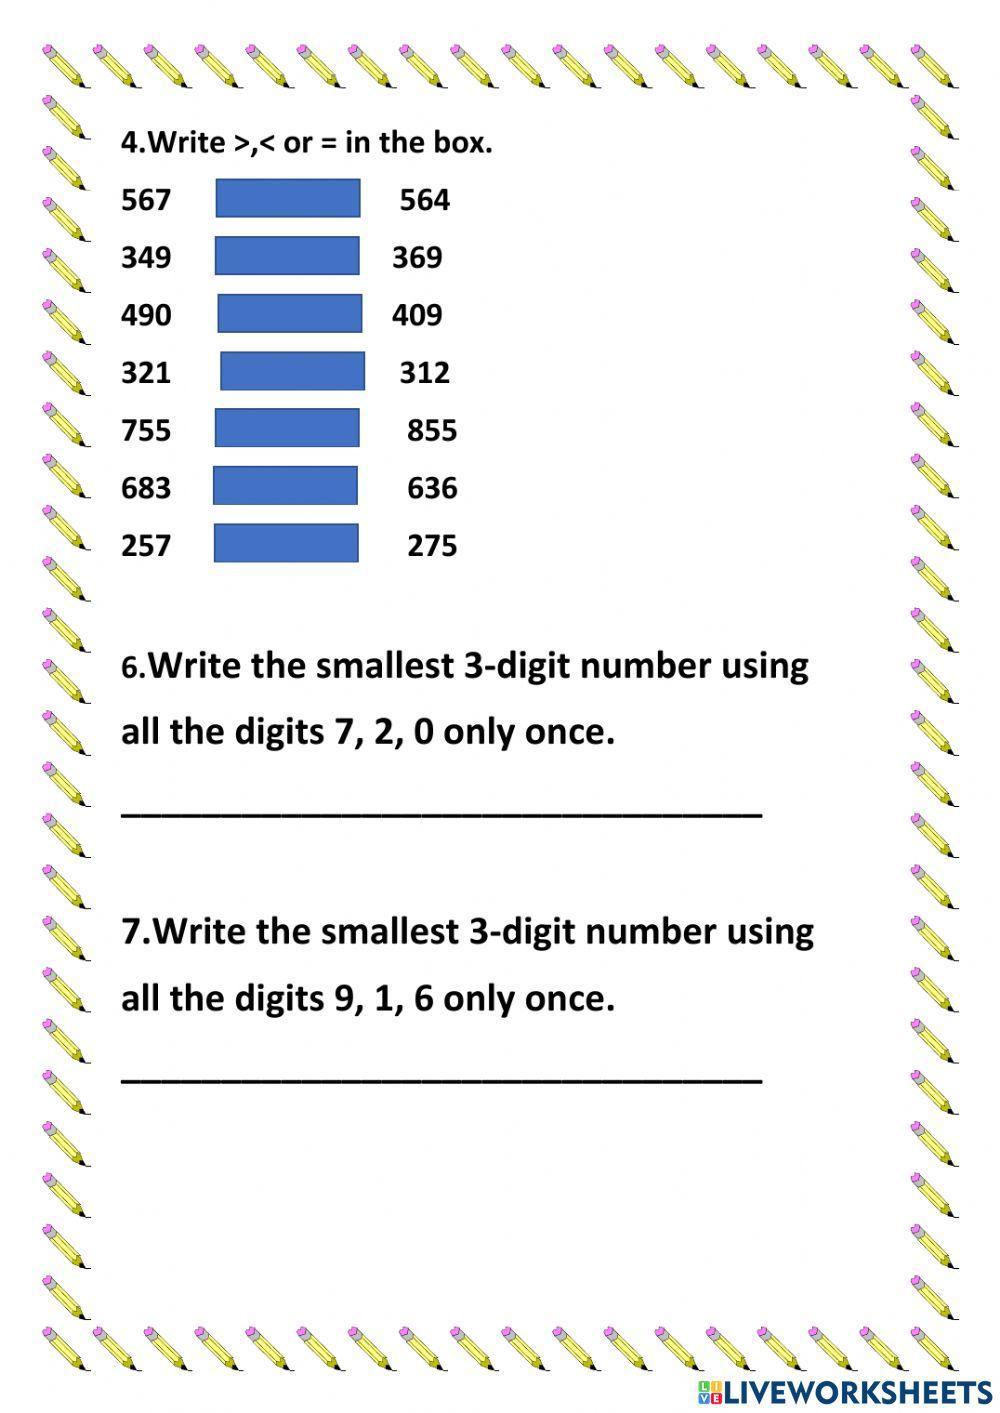 Compare, Order, and Form 3-Digit Numbers